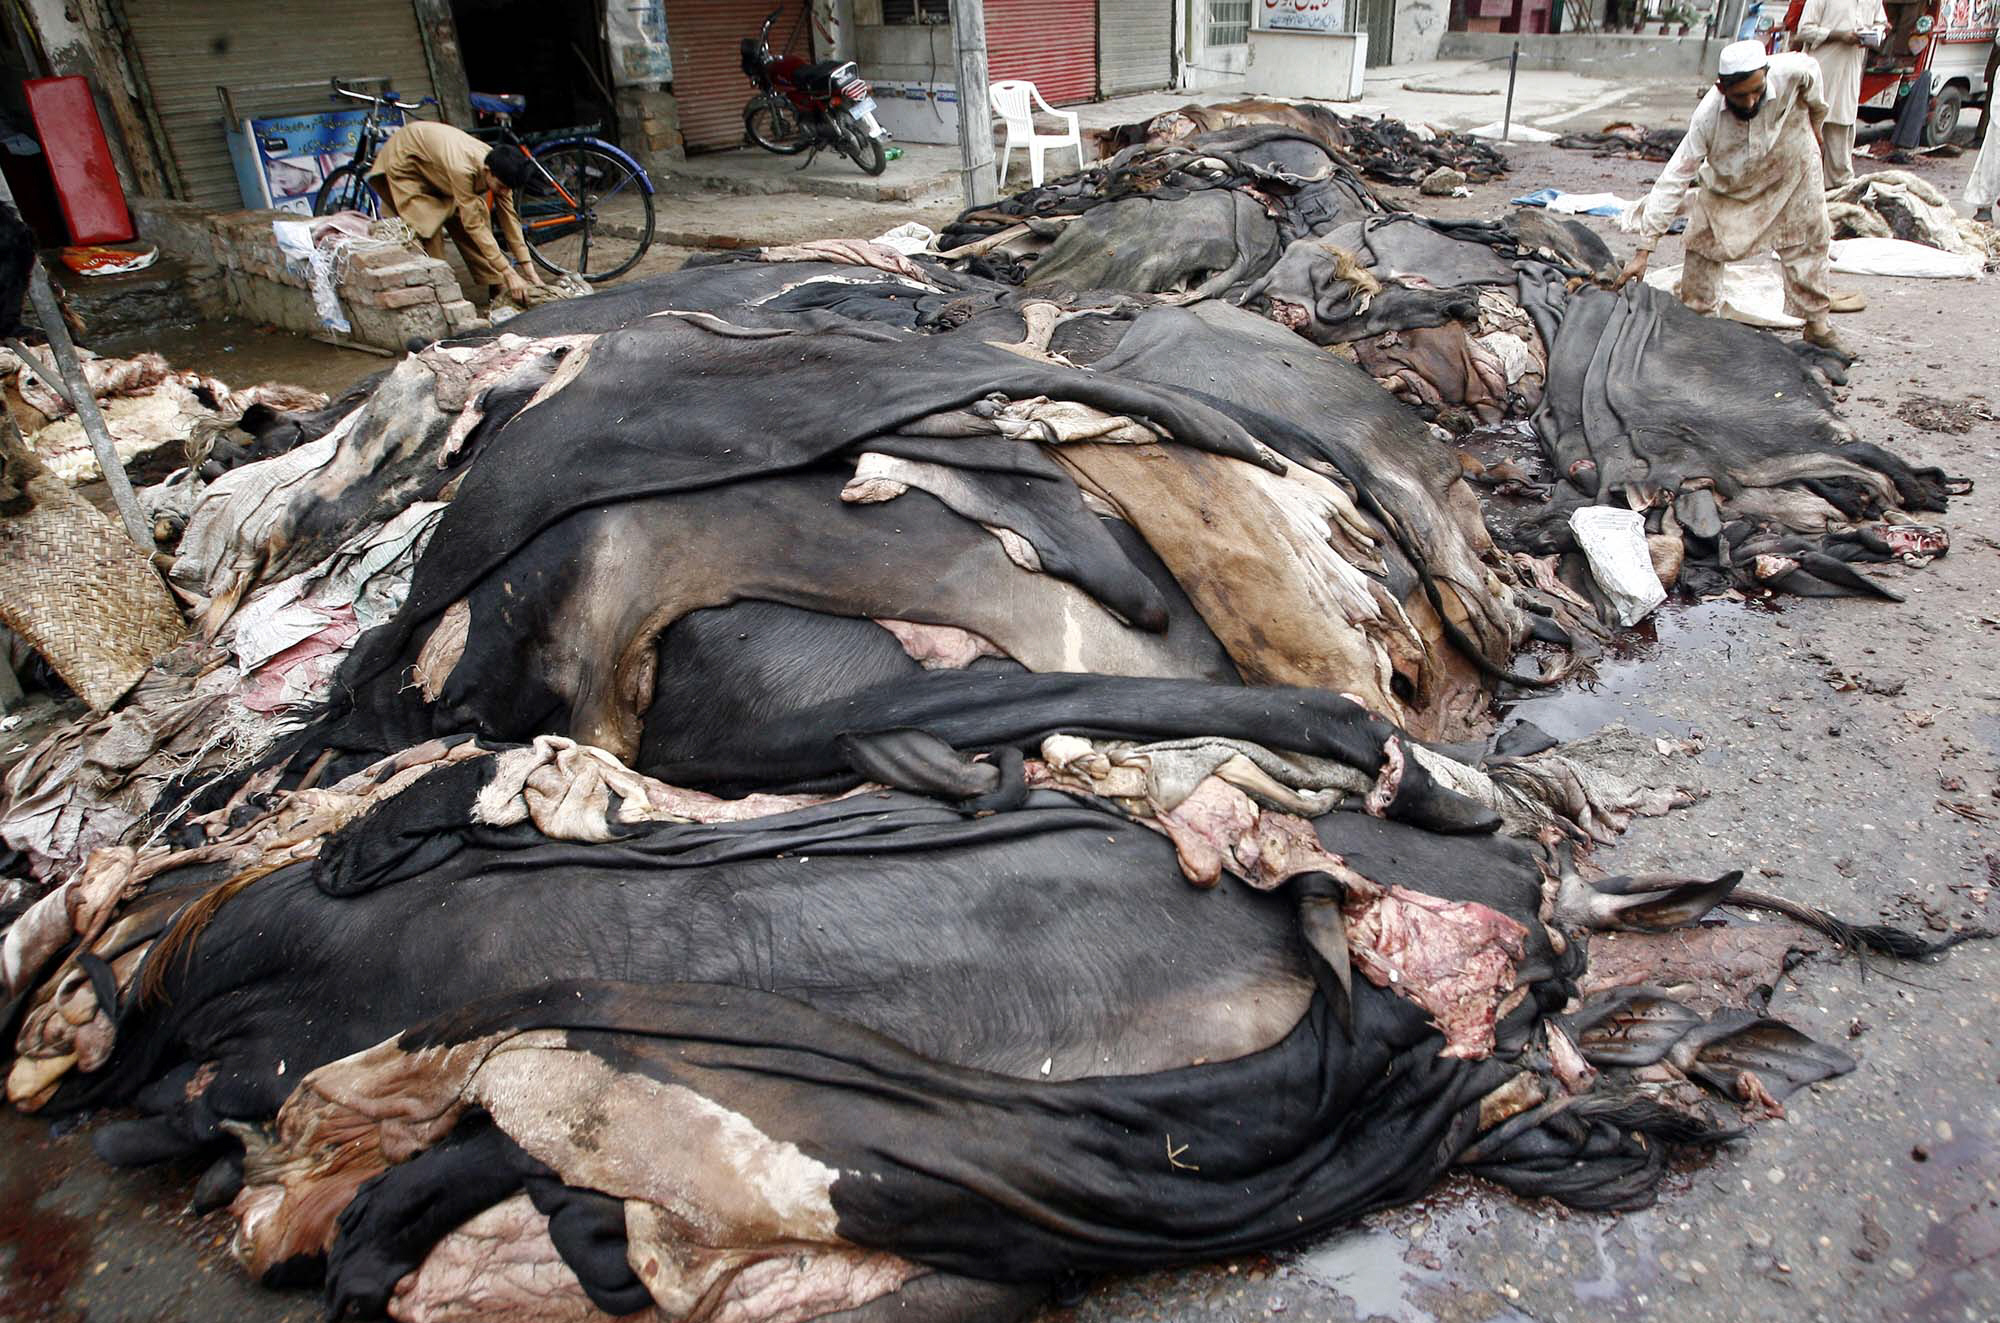 10 netted for collecting animal hides unlawfully